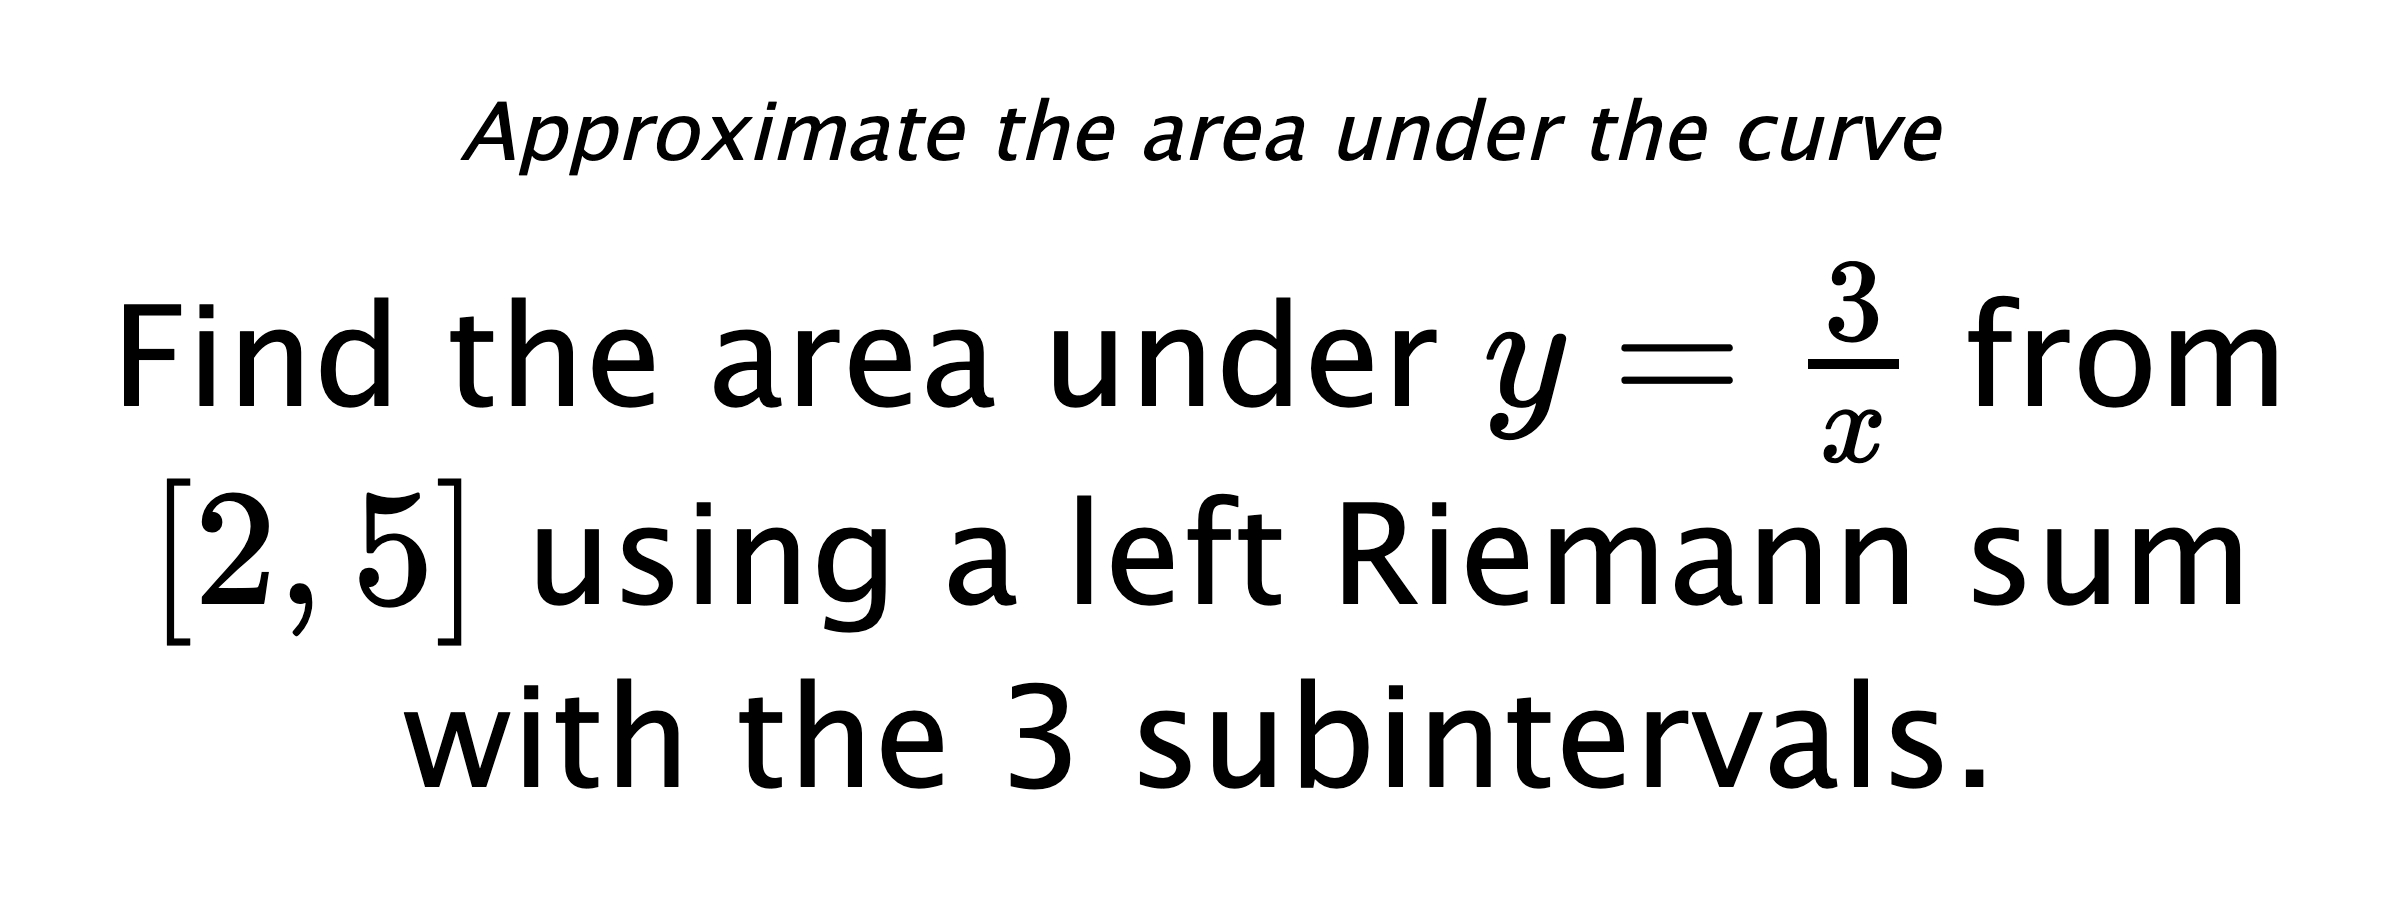 Approximate the area under the curve Find the area under $ y=\frac{3}{x} $ from $ [2,5] $ using a left Riemann sum with the 3 subintervals.